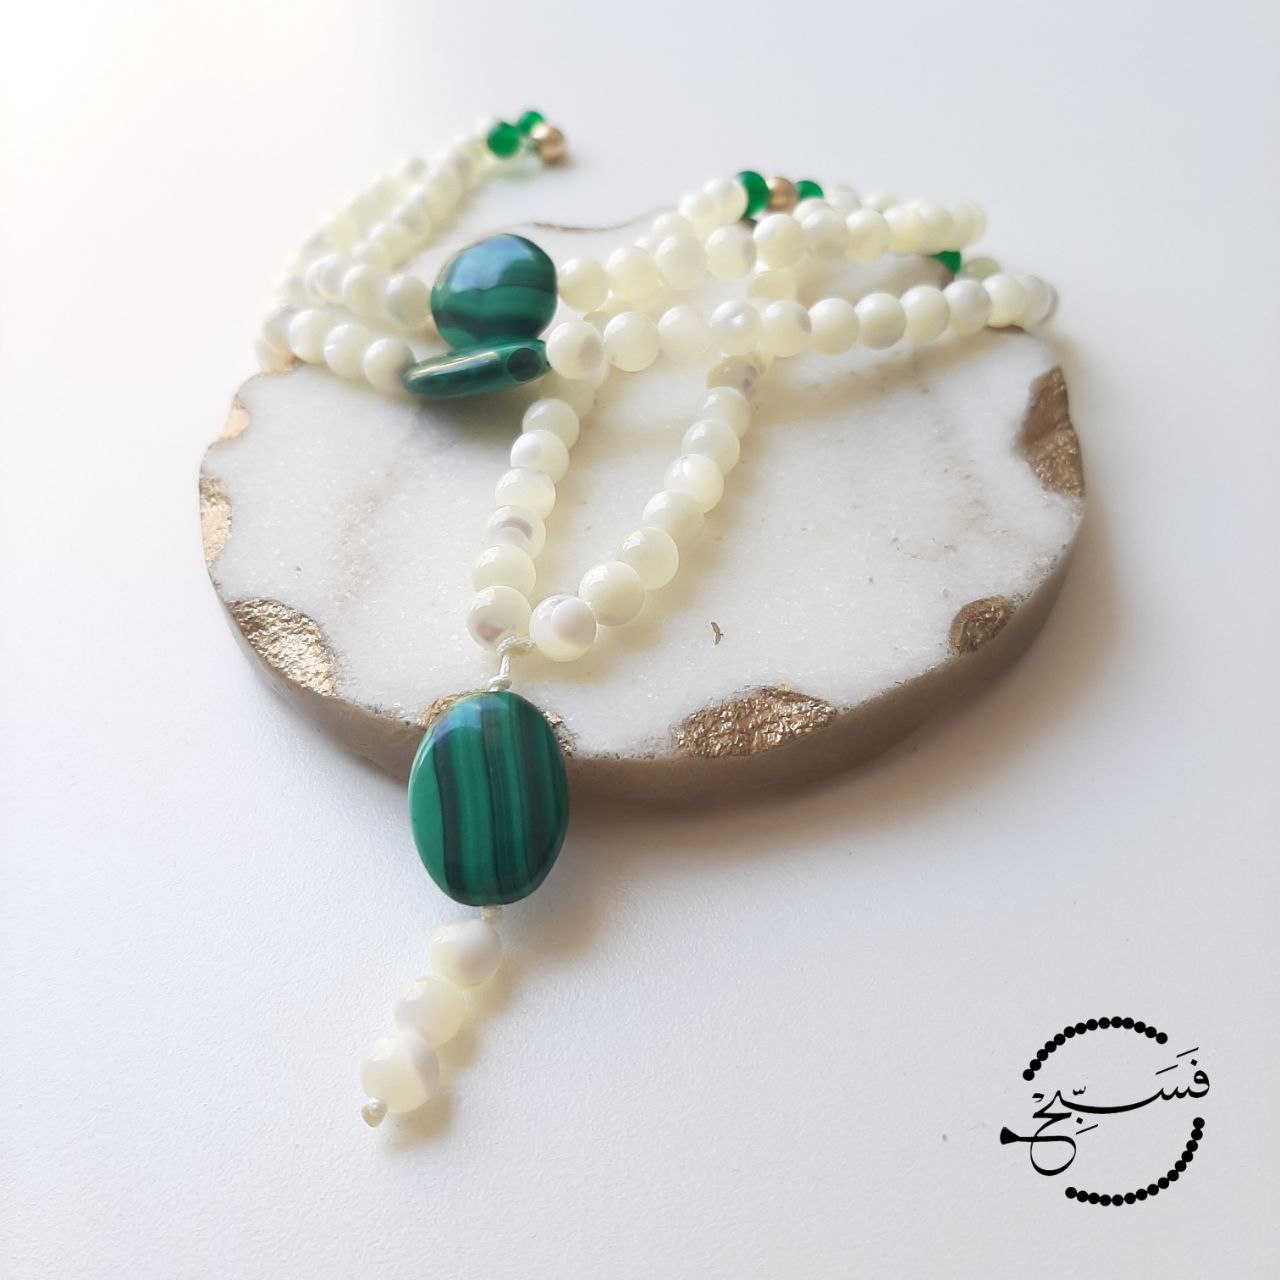 Superb quality natural green malachite has been used to create this piece. It feels super smooth to touch, and is a really lovely piece to use.  Packaged in a luxurious pouch and a gift box.  99 beads